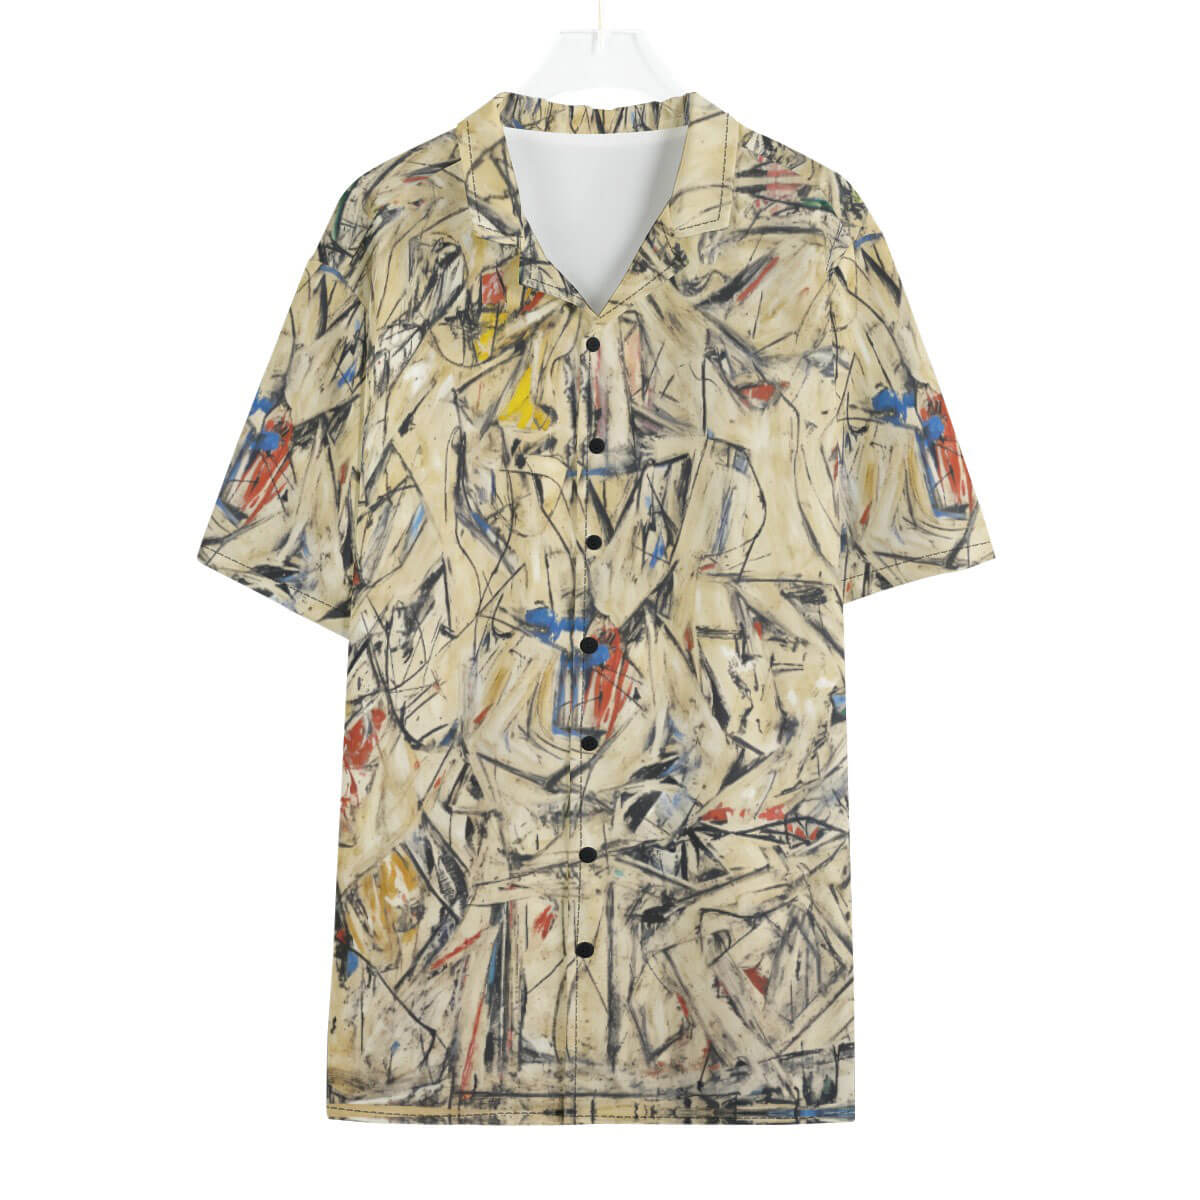 Willem de Kooning's Excavation abstract expressionist shirt